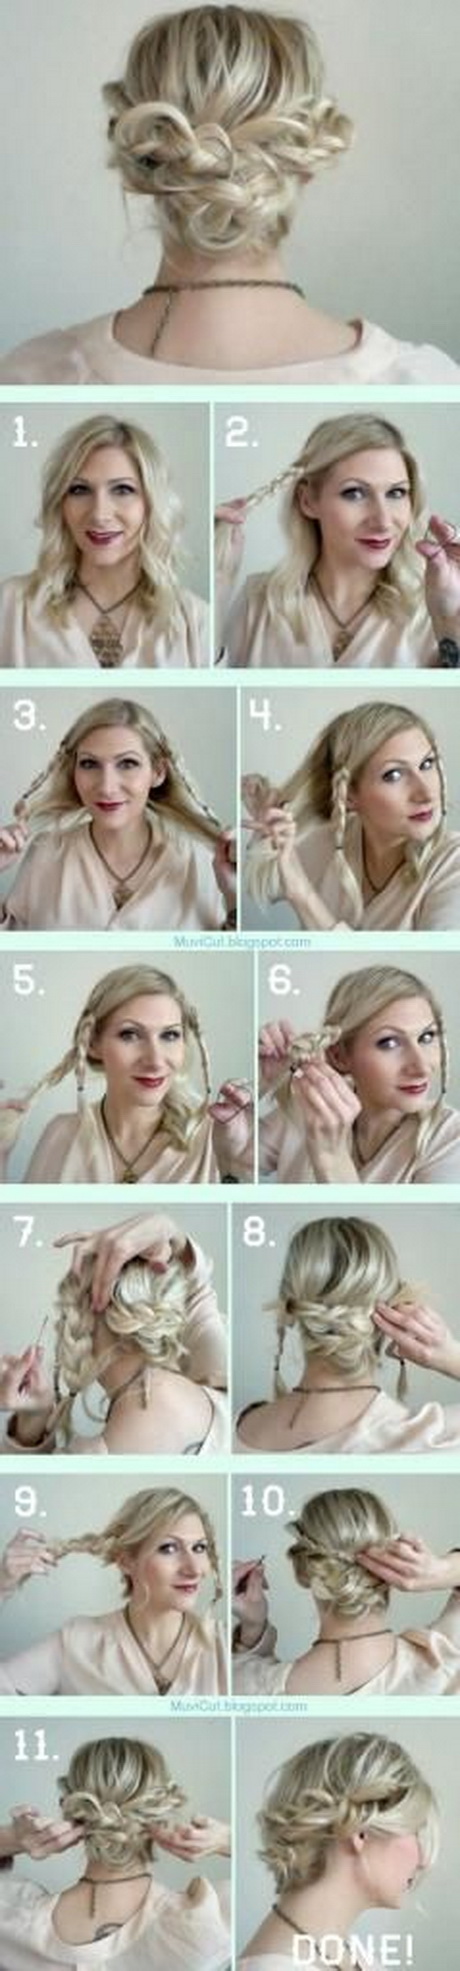 Step by step prom hairstyles step-by-step-prom-hairstyles-02-3